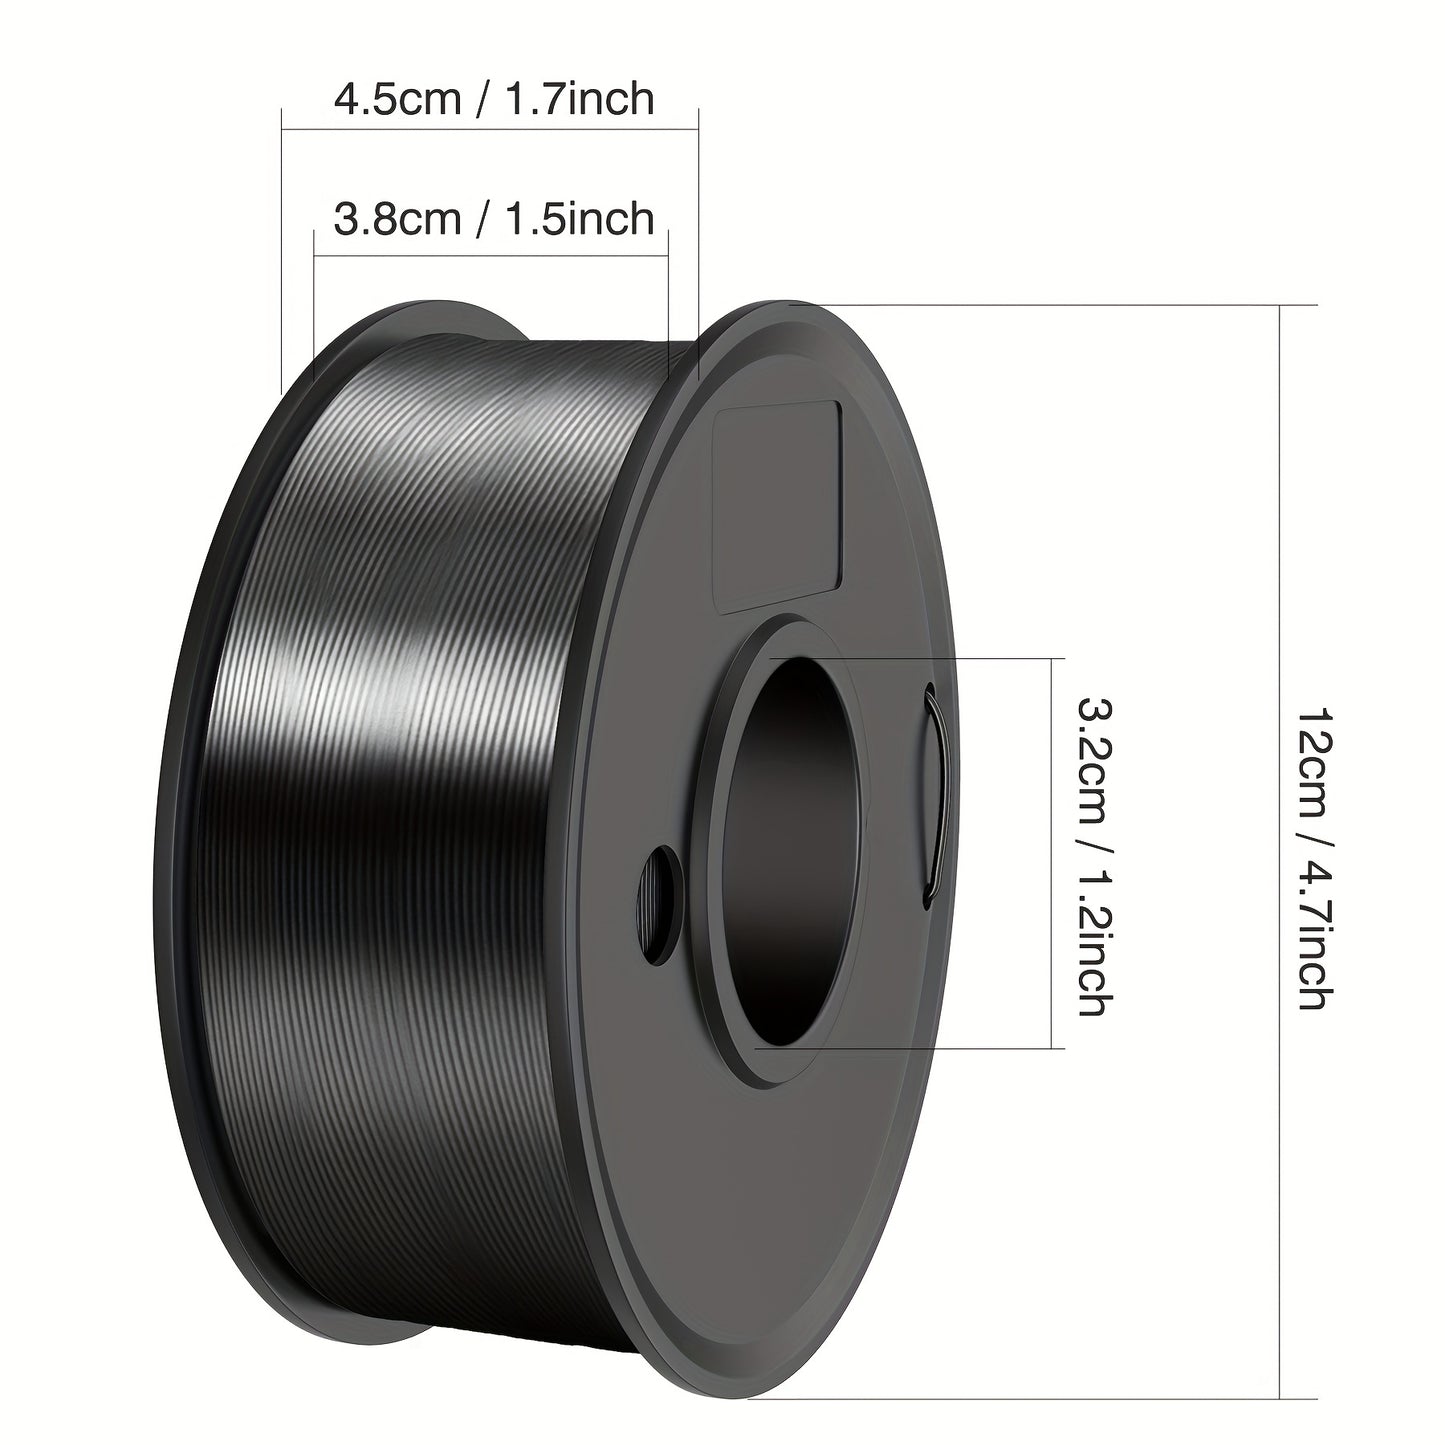 Silk PLA Filament SUNLU Neatly Wrapped PLA 3D Printer Filament 1.75mm Size Accuracy+/-0.02mm, Suitable For Most FDM3D Printers Vacuum Packaging 8.82oz